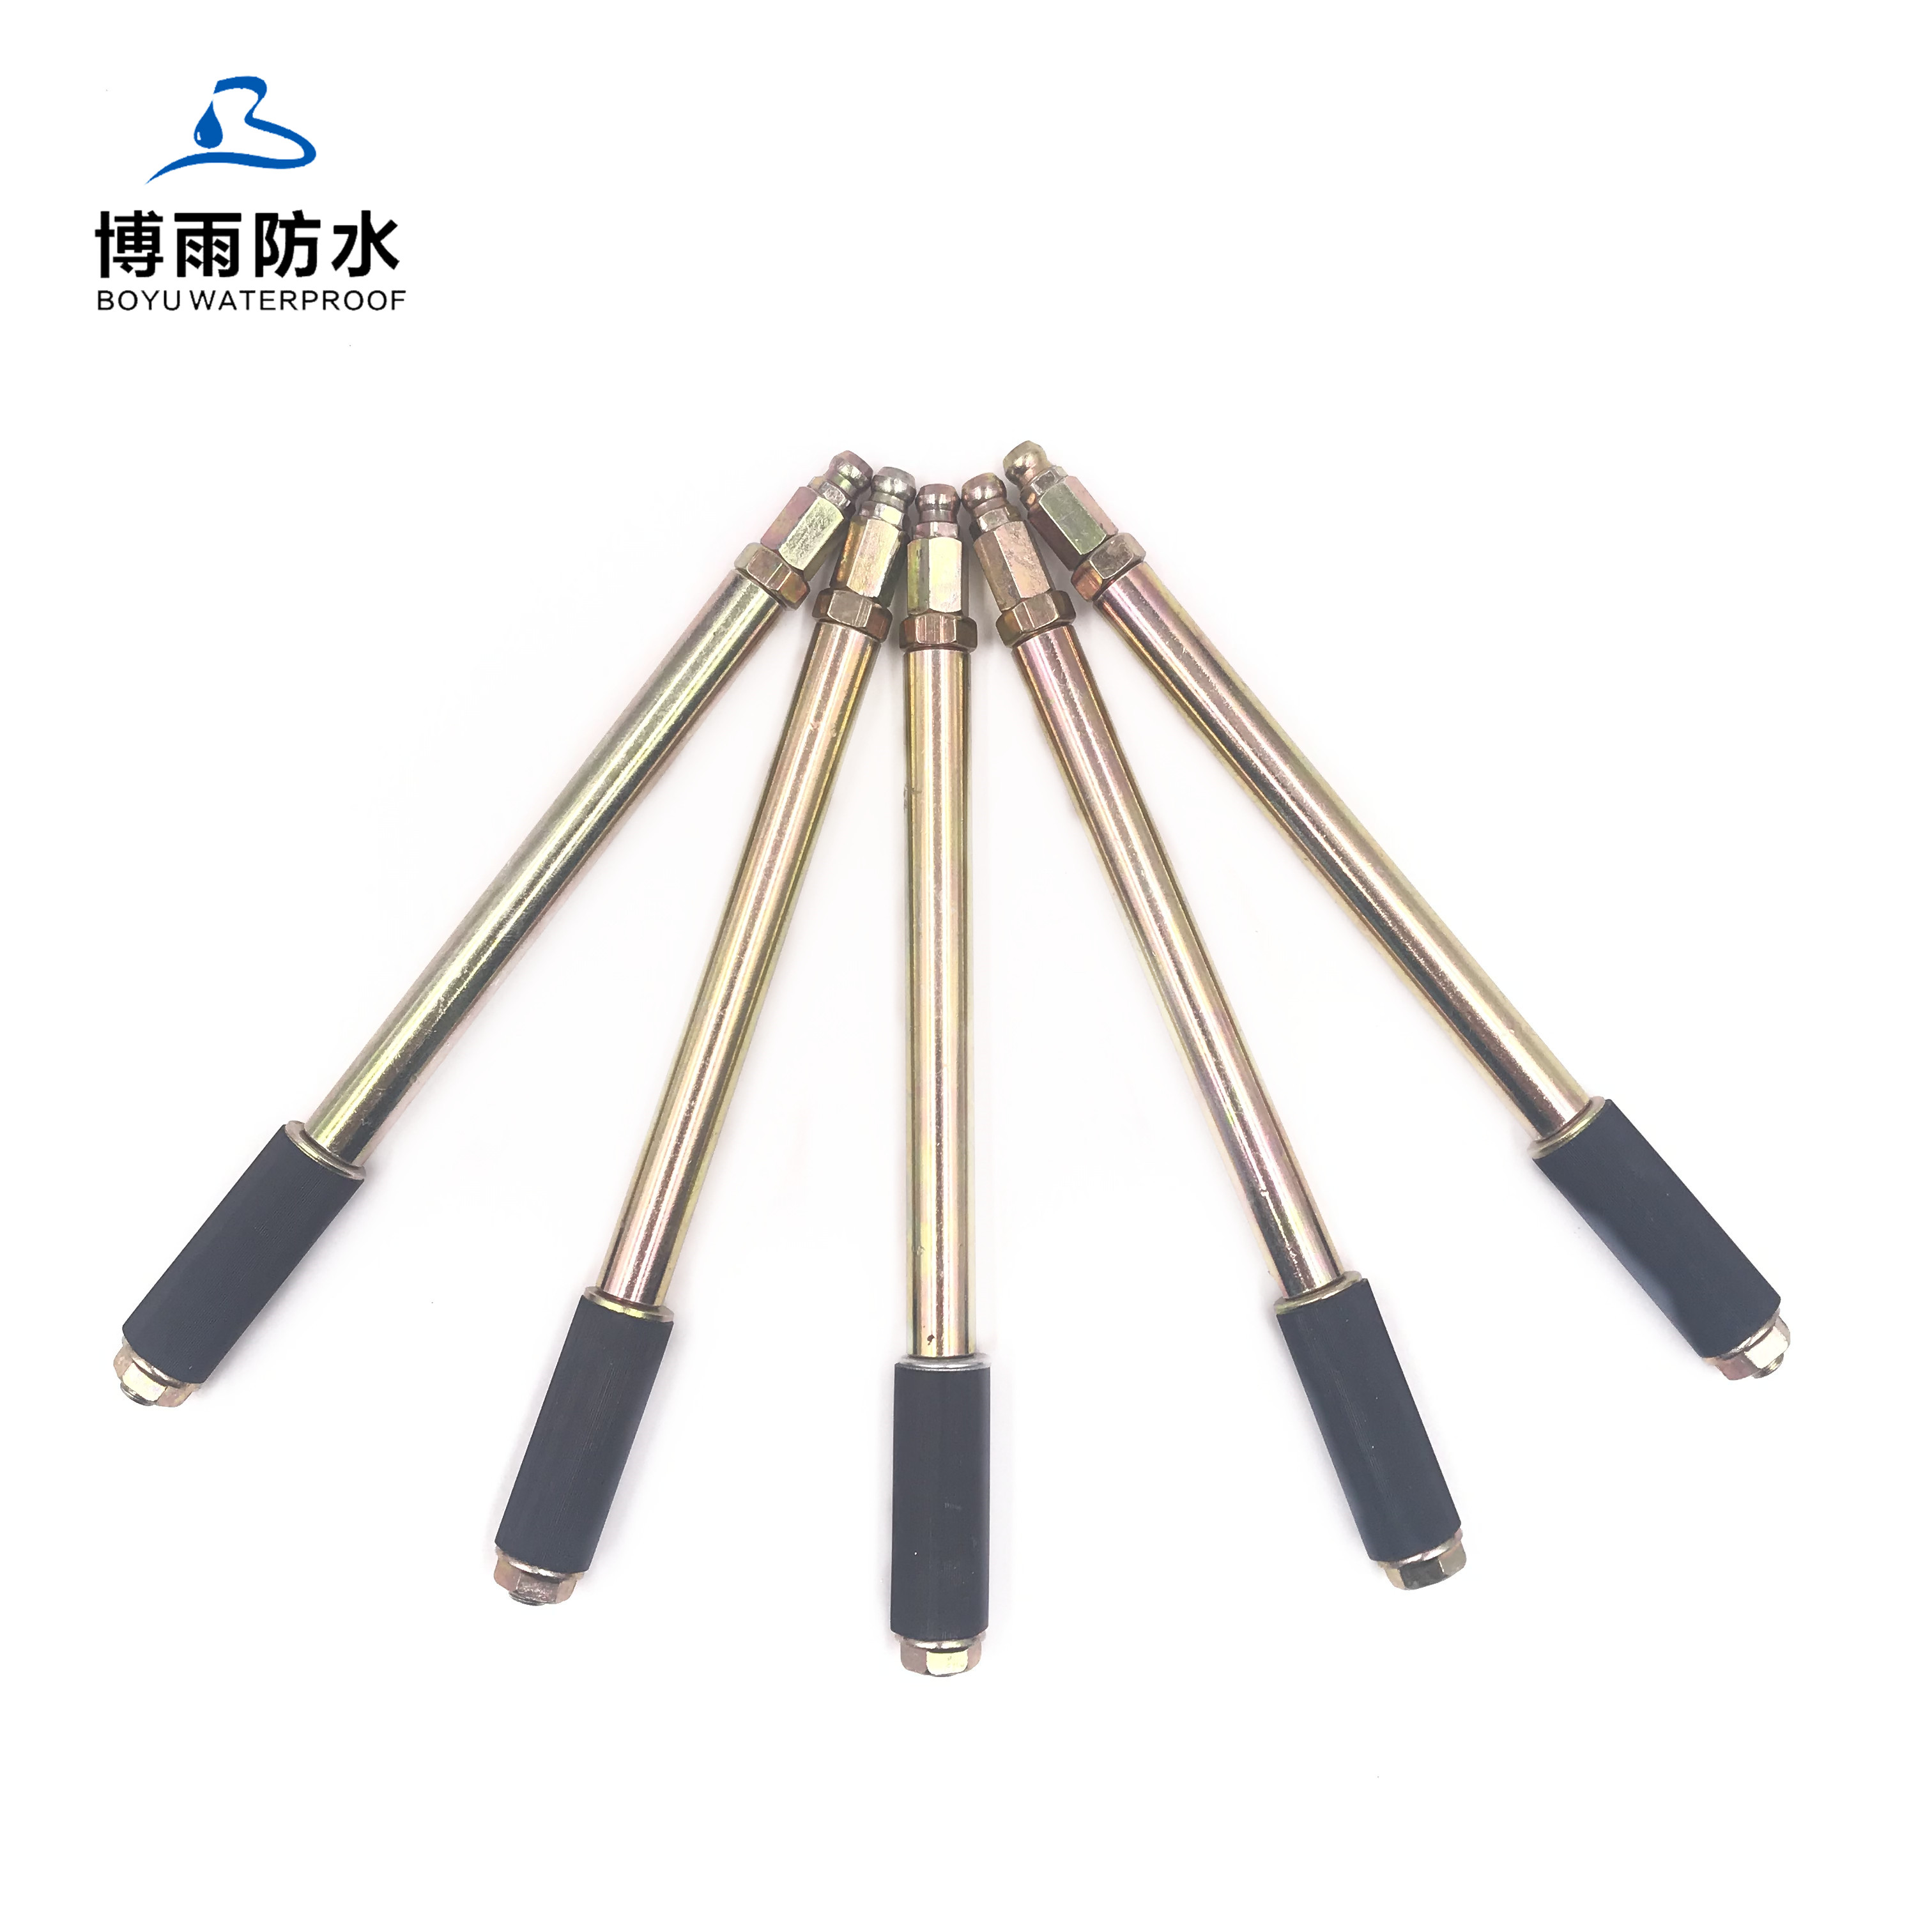 Super Purchasing for Steel Packer - Brass color Injection Packers steel 13*150mm A15 grouting injection packers – Boyu